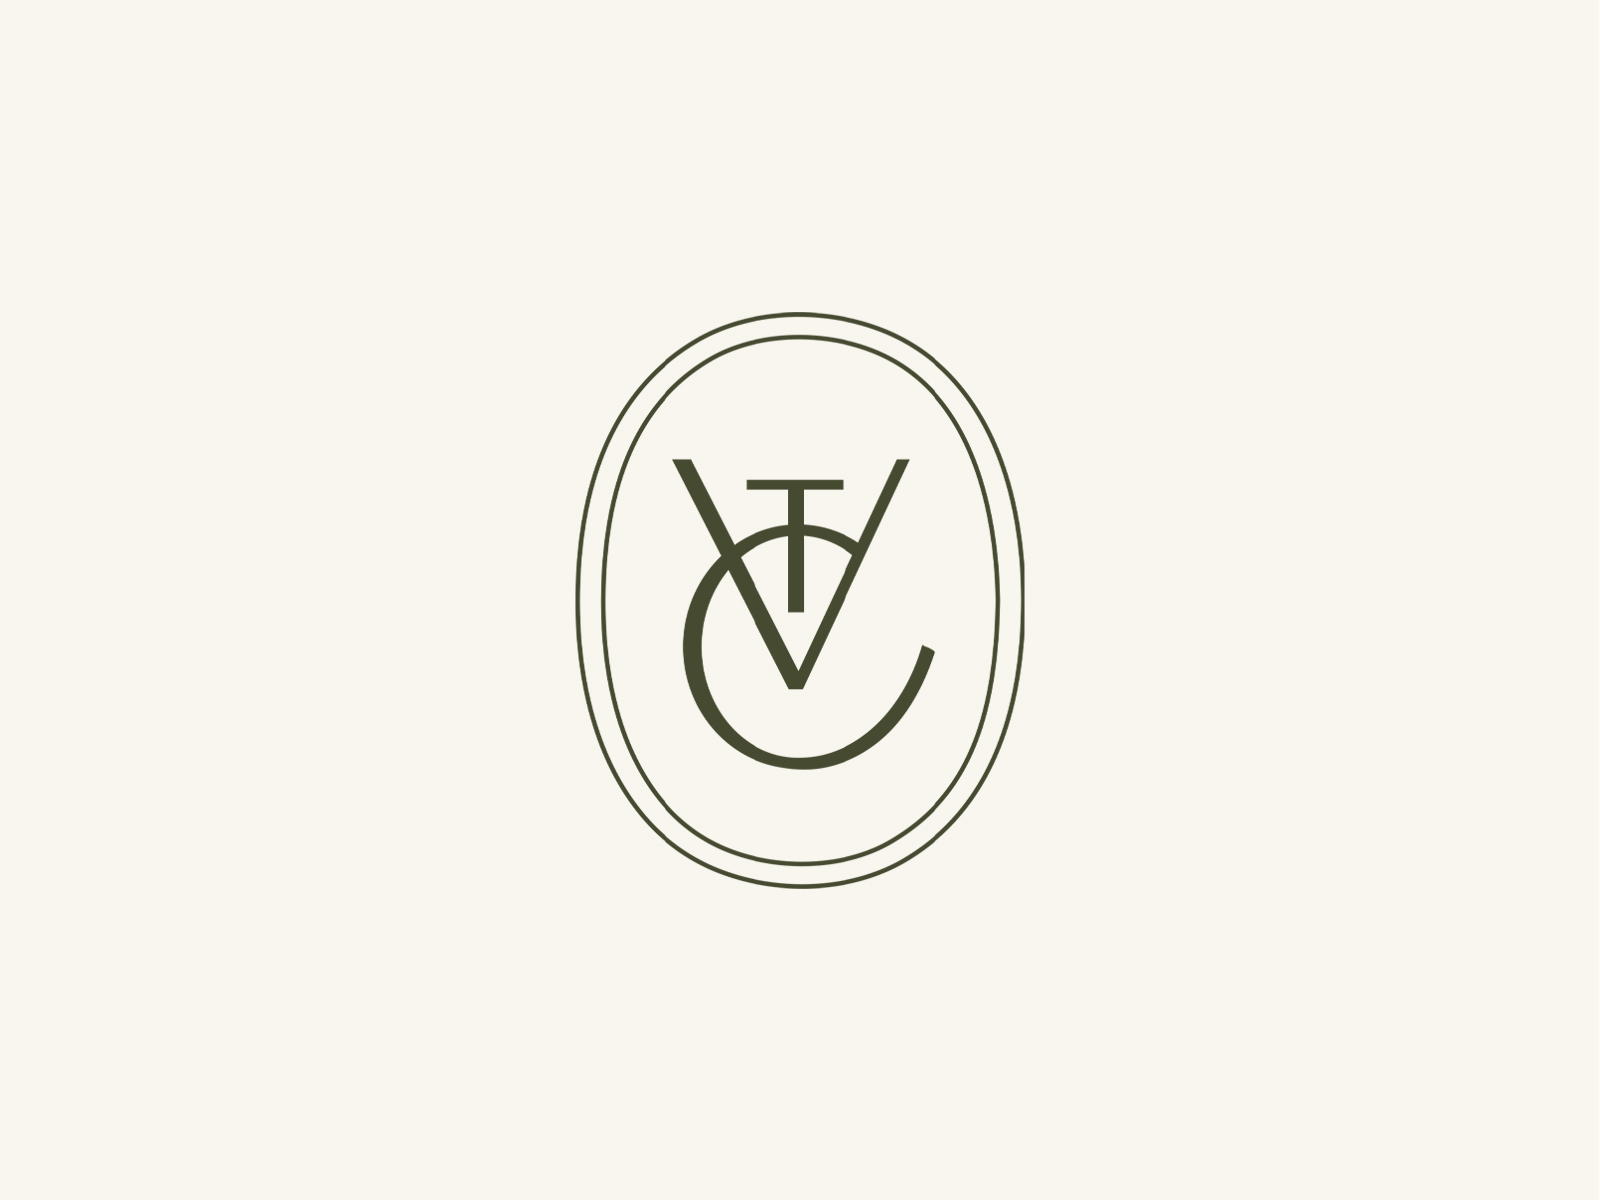 The Visual Collective by Laura Bennett on Dribbble